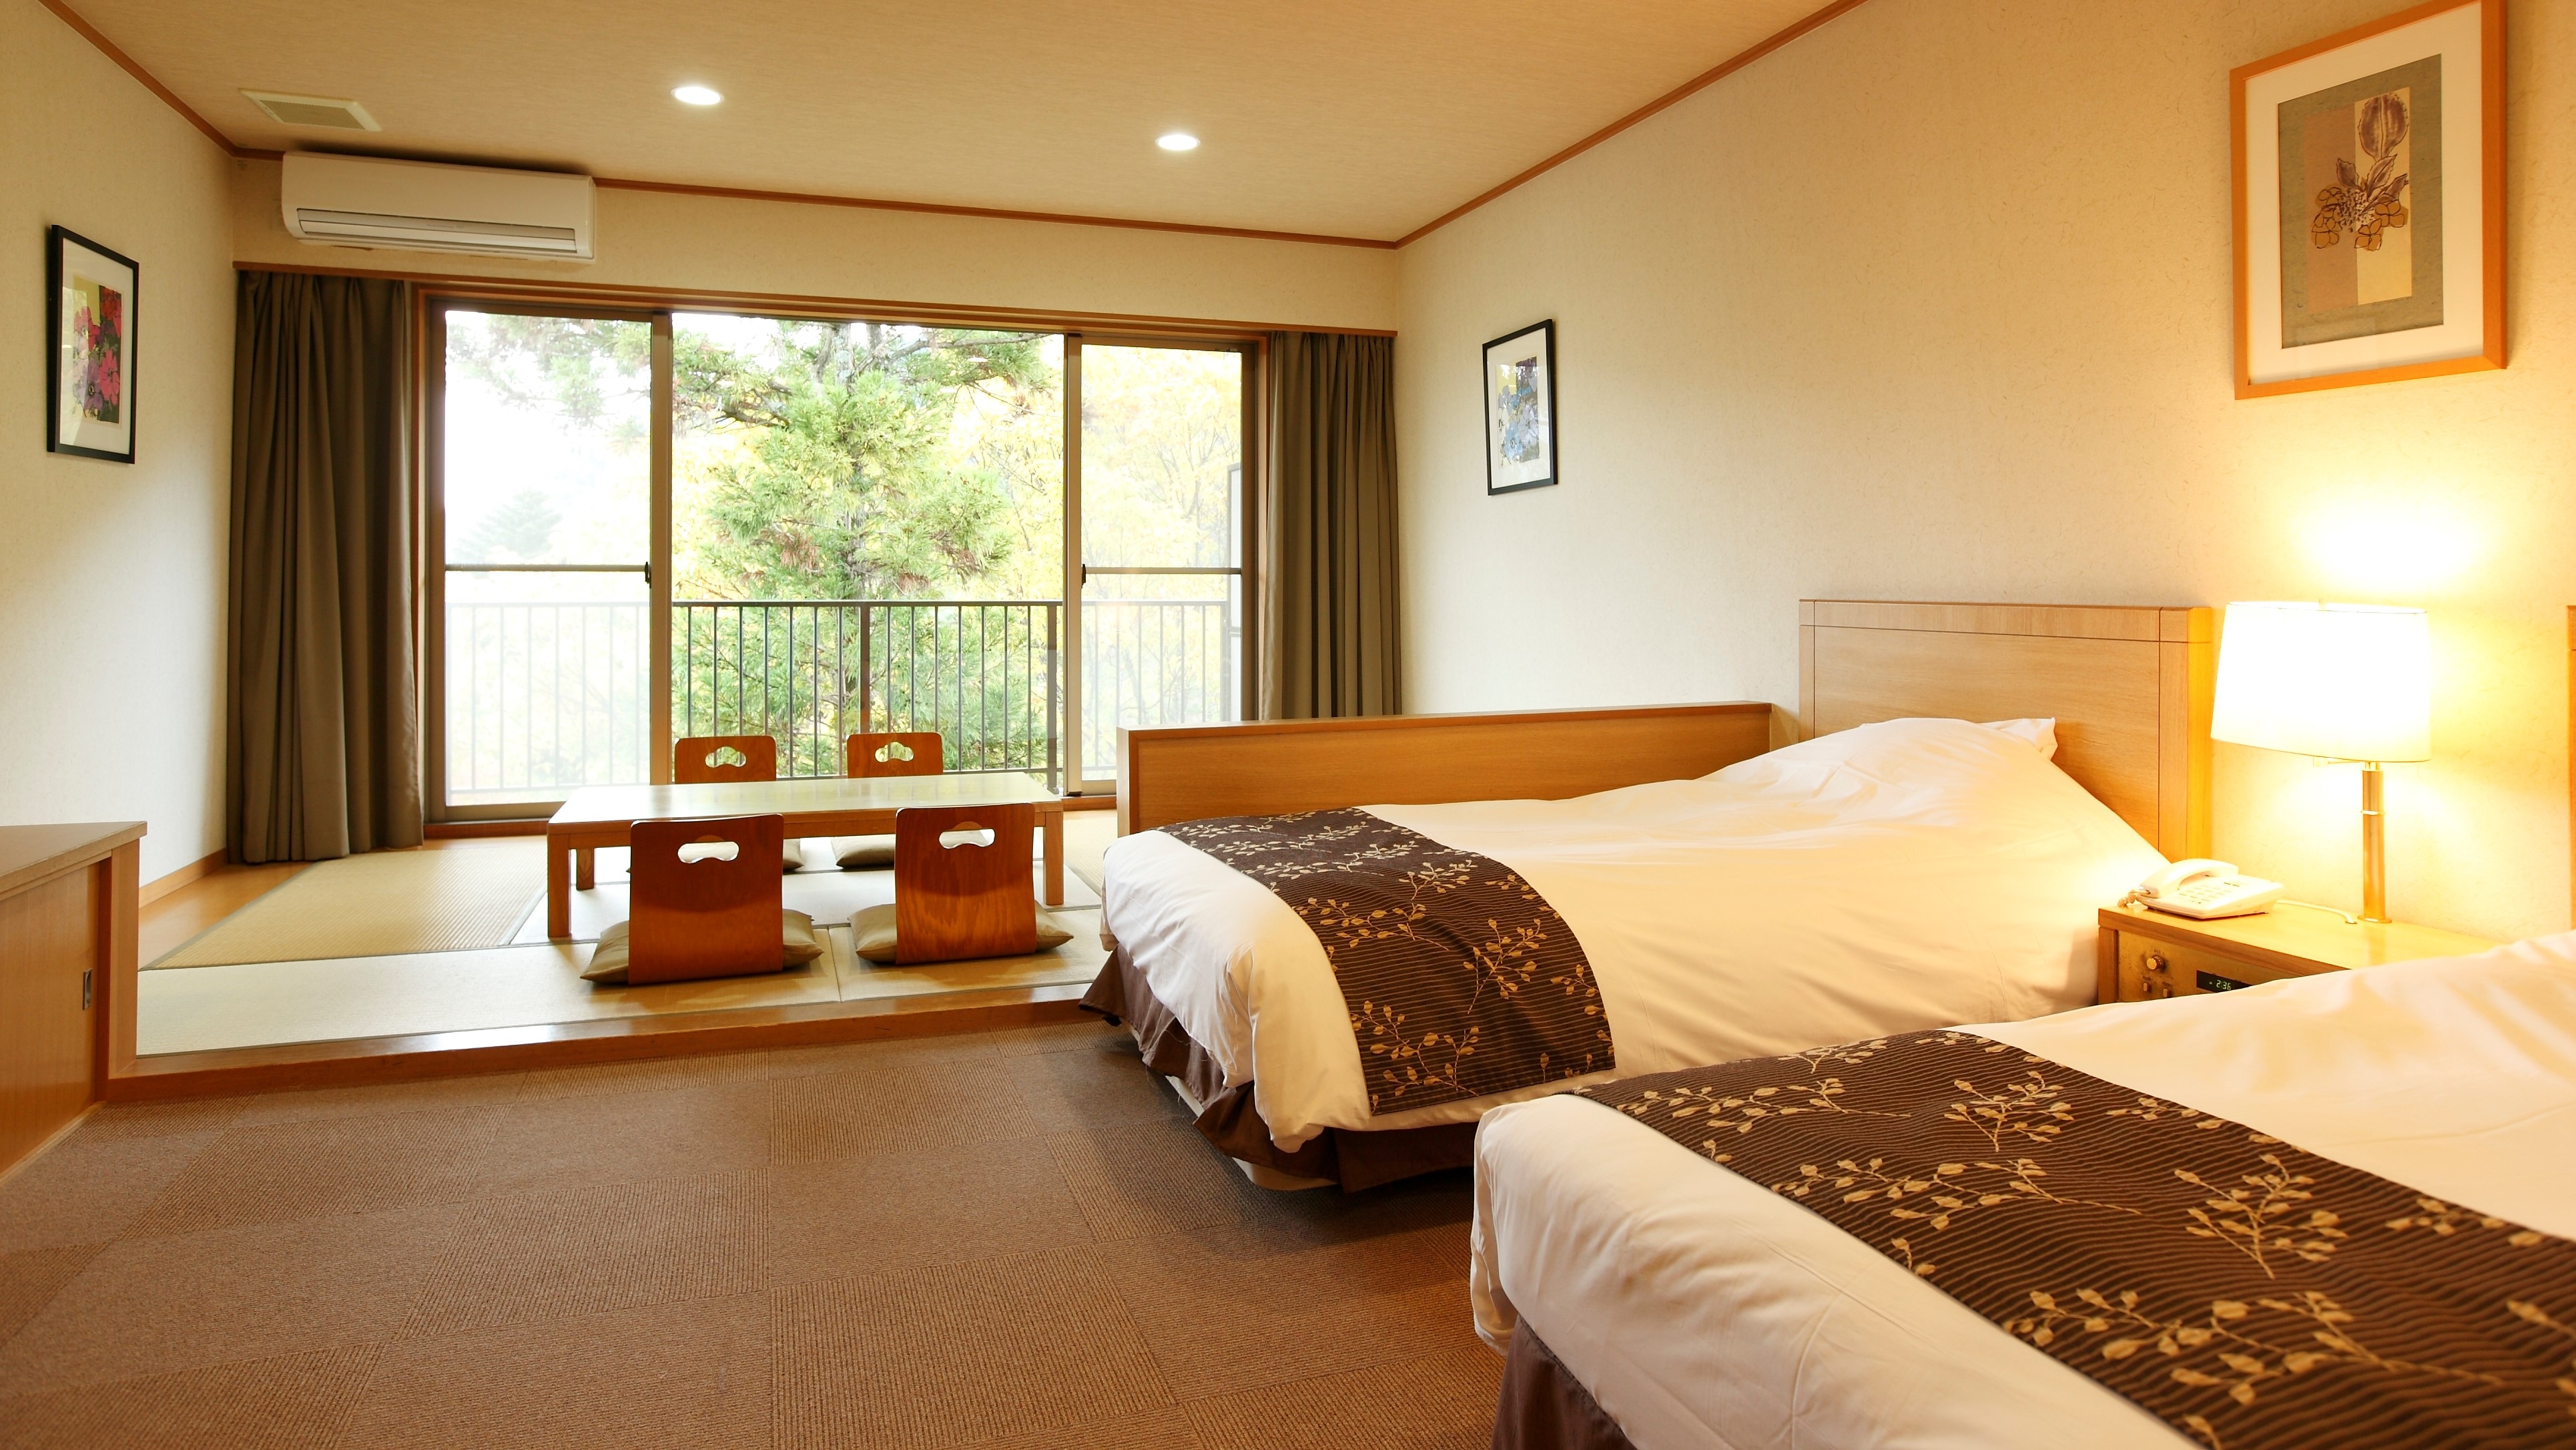 Equipped with two tall beds, you can spend a relaxing time.